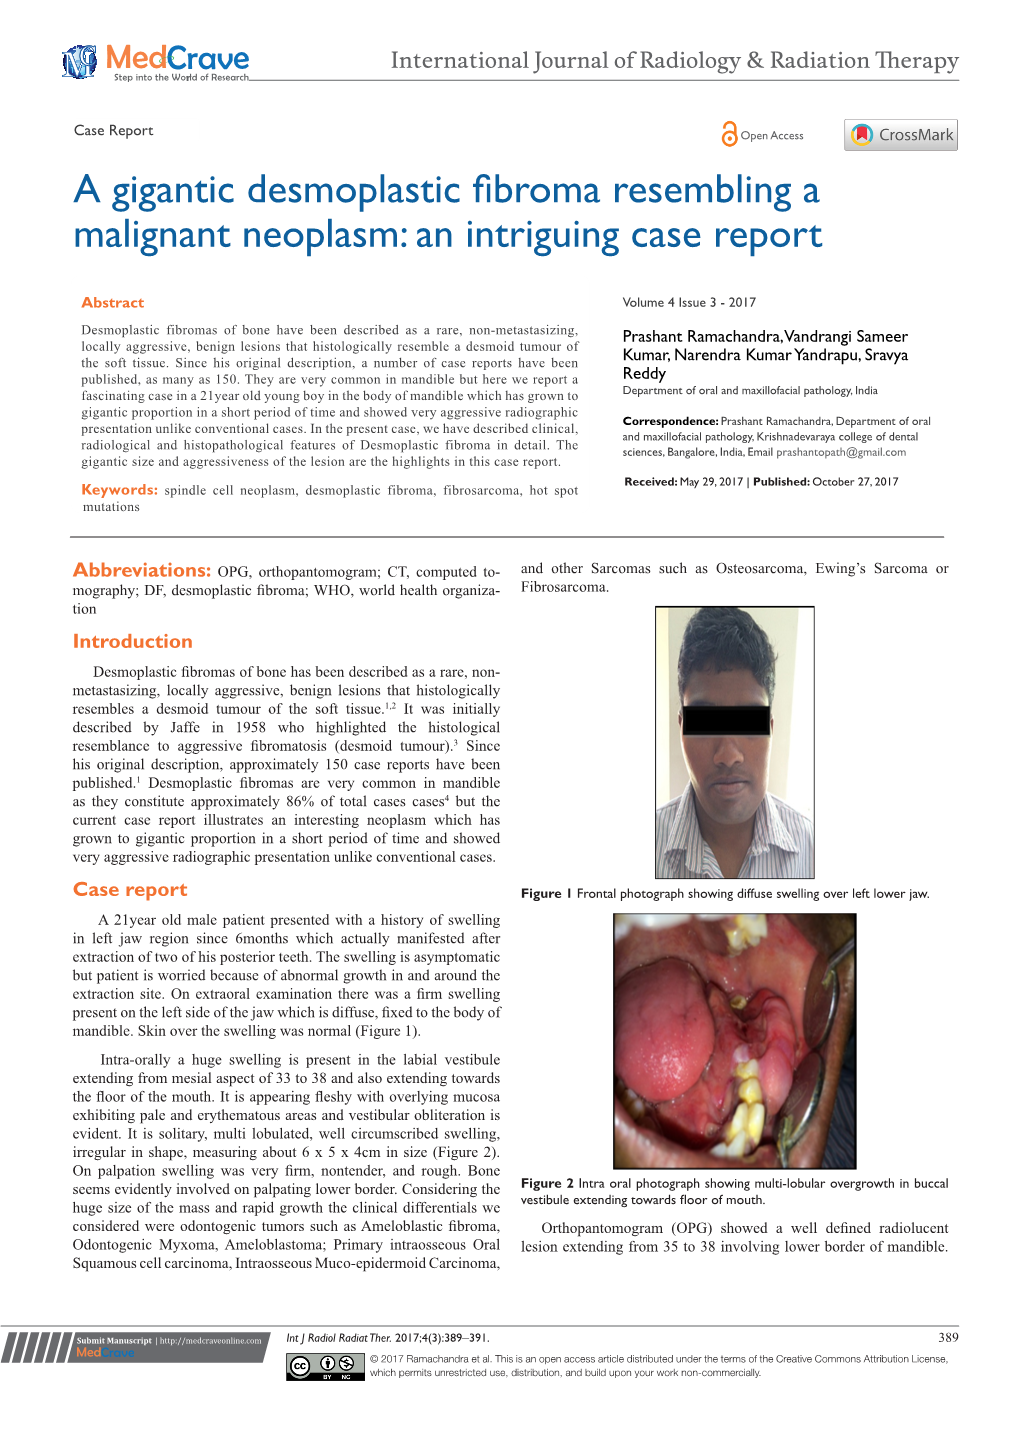 A Gigantic Desmoplastic Fibroma Resembling a Malignant Neoplasm: an Intriguing Case Report